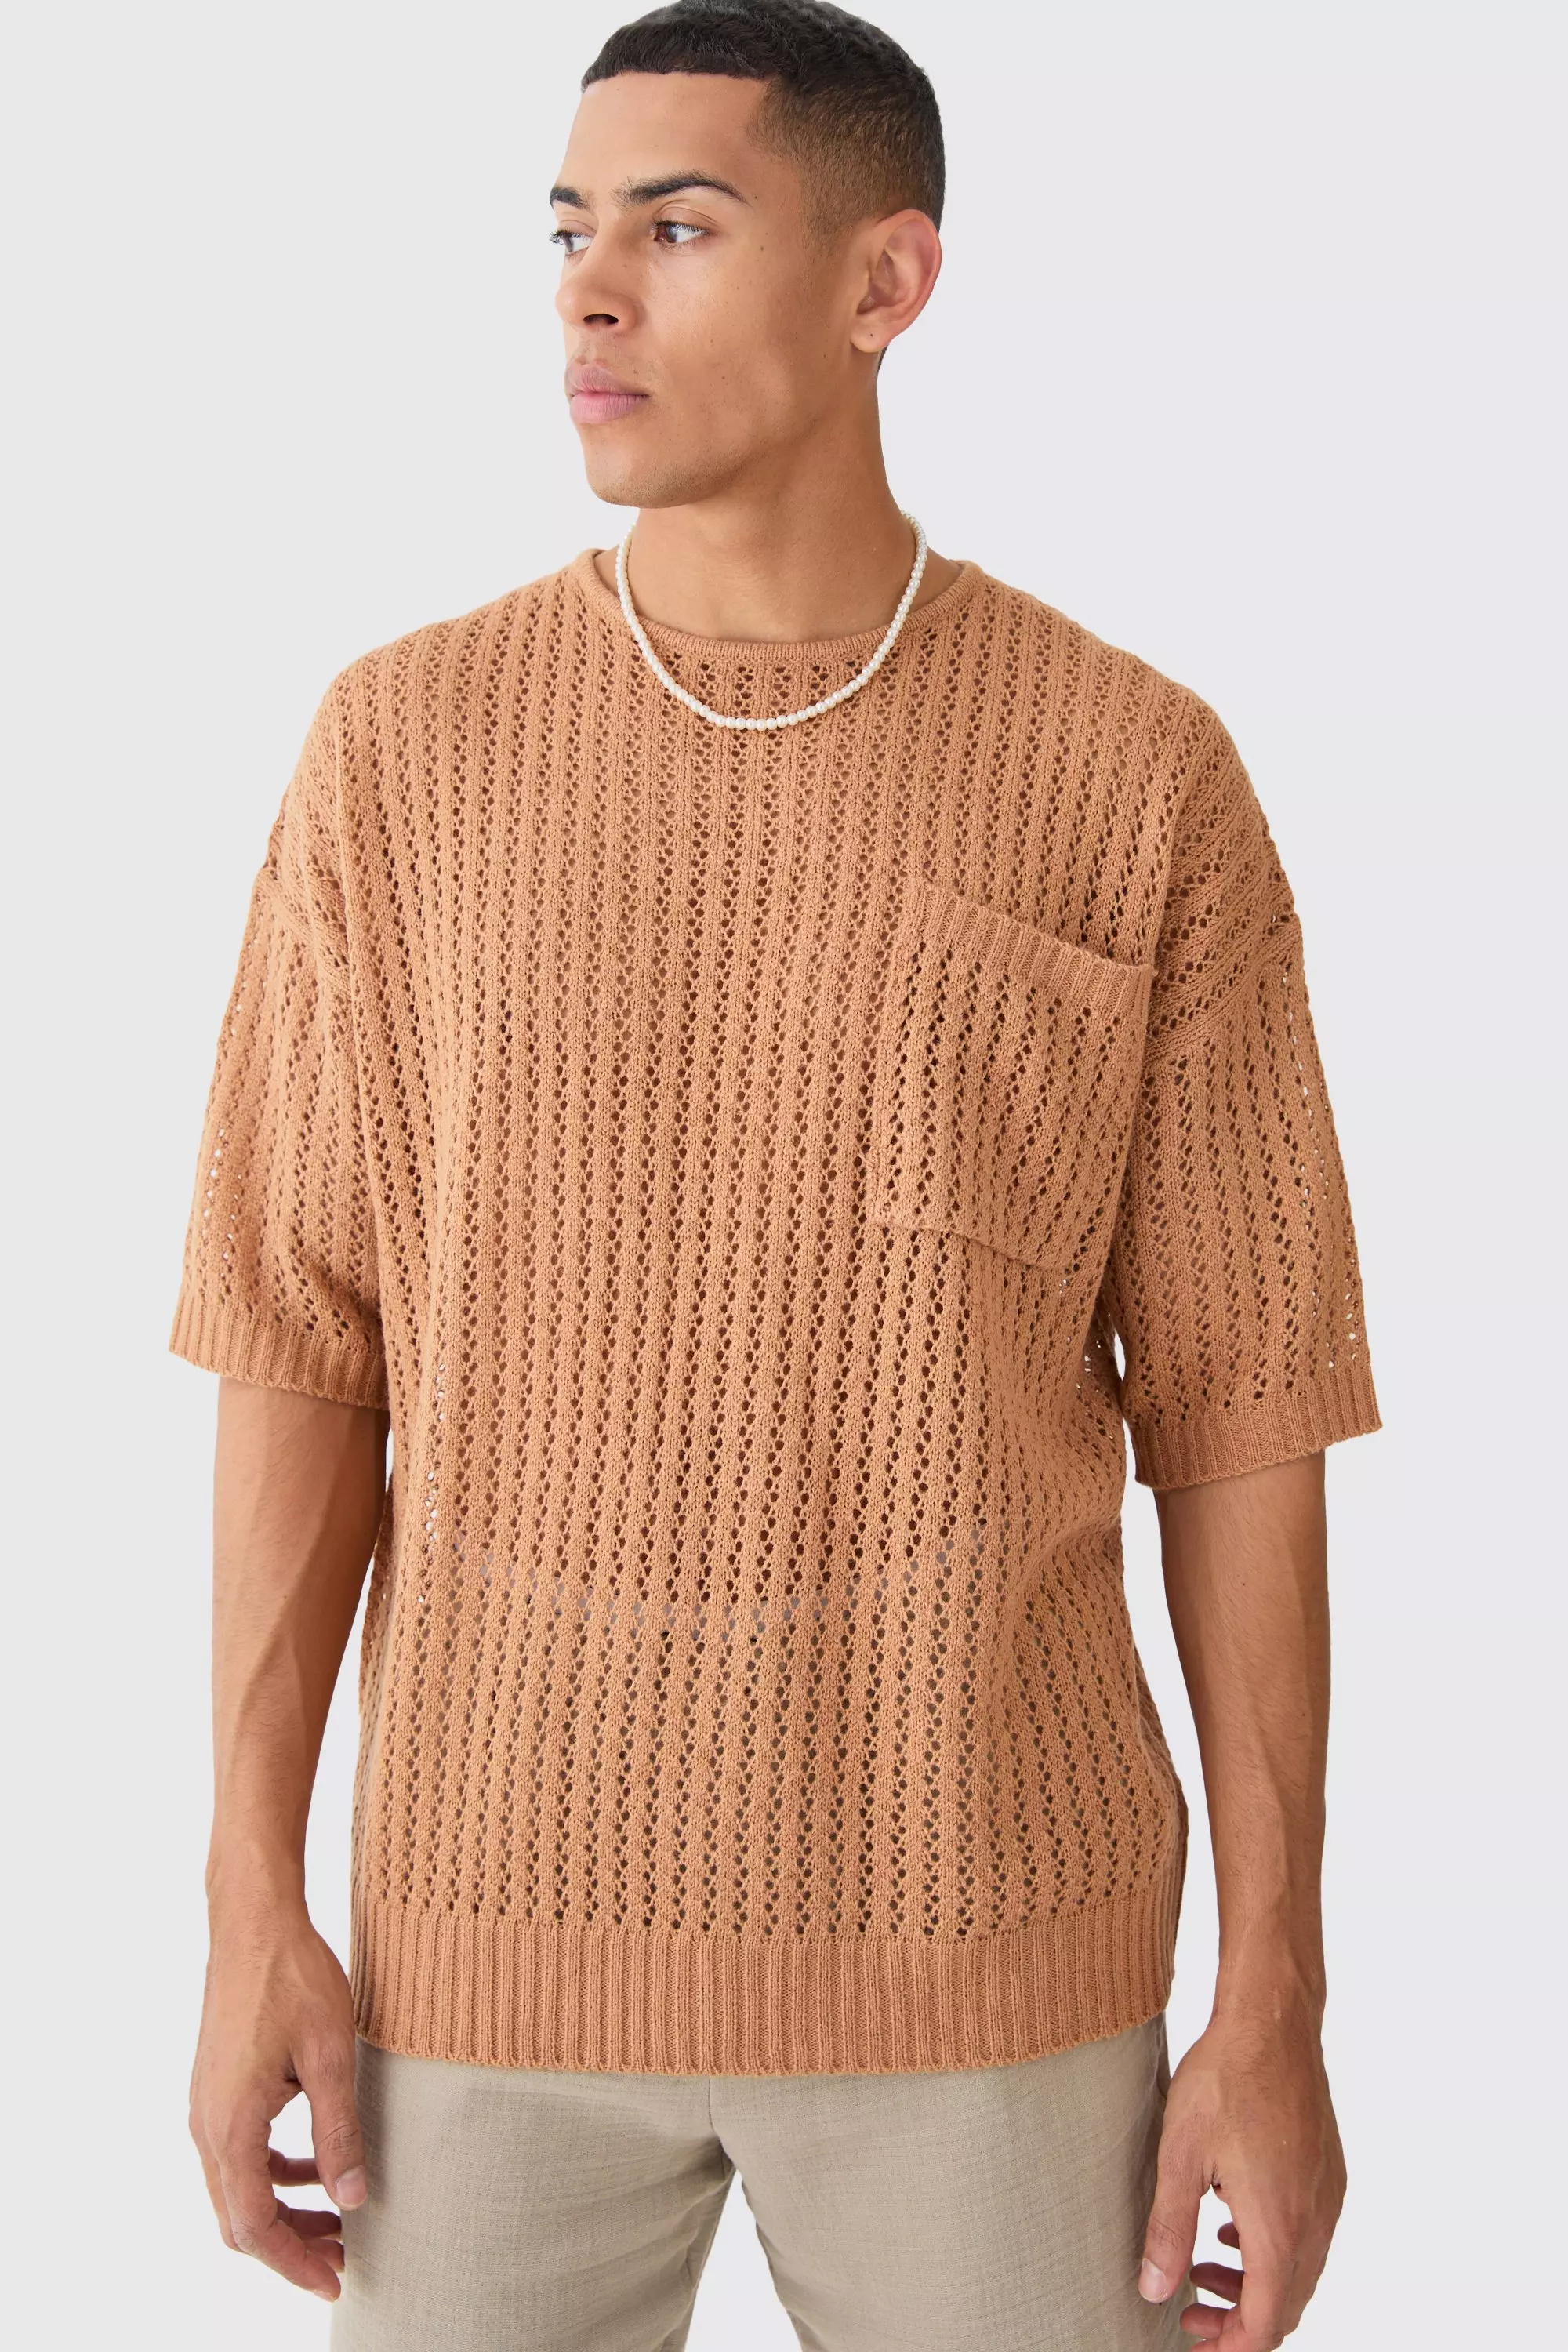 Beige Oversized Open Stitch Tshirt With Pocket In Taupe